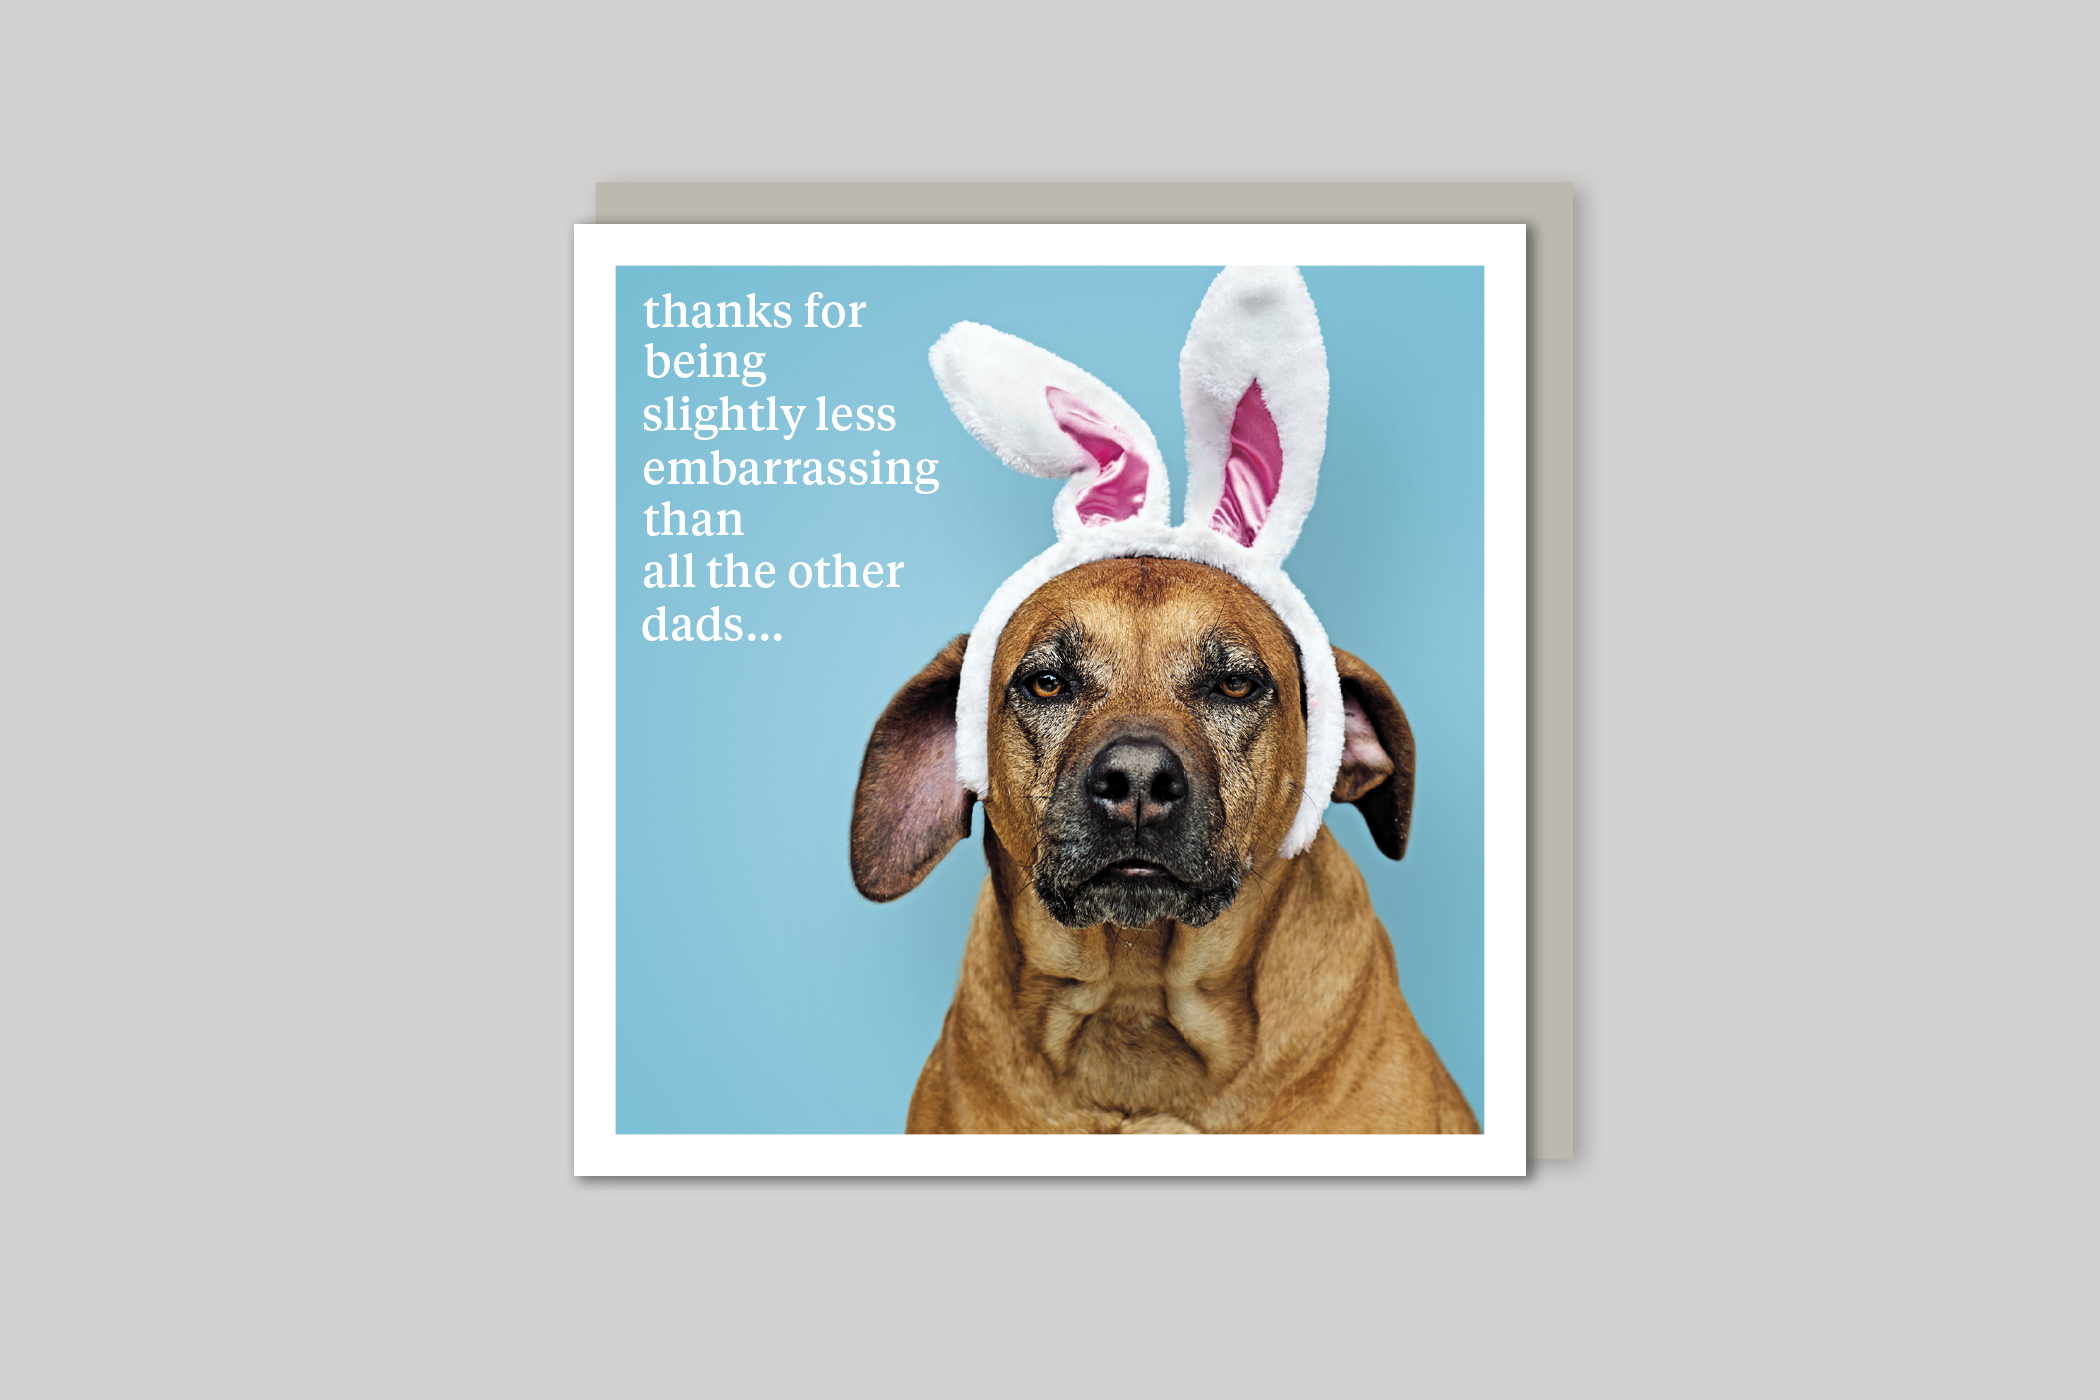 Less Embarrassing dad card quirky animal portrait from Curious World range of greeting cards by Icon, back page.